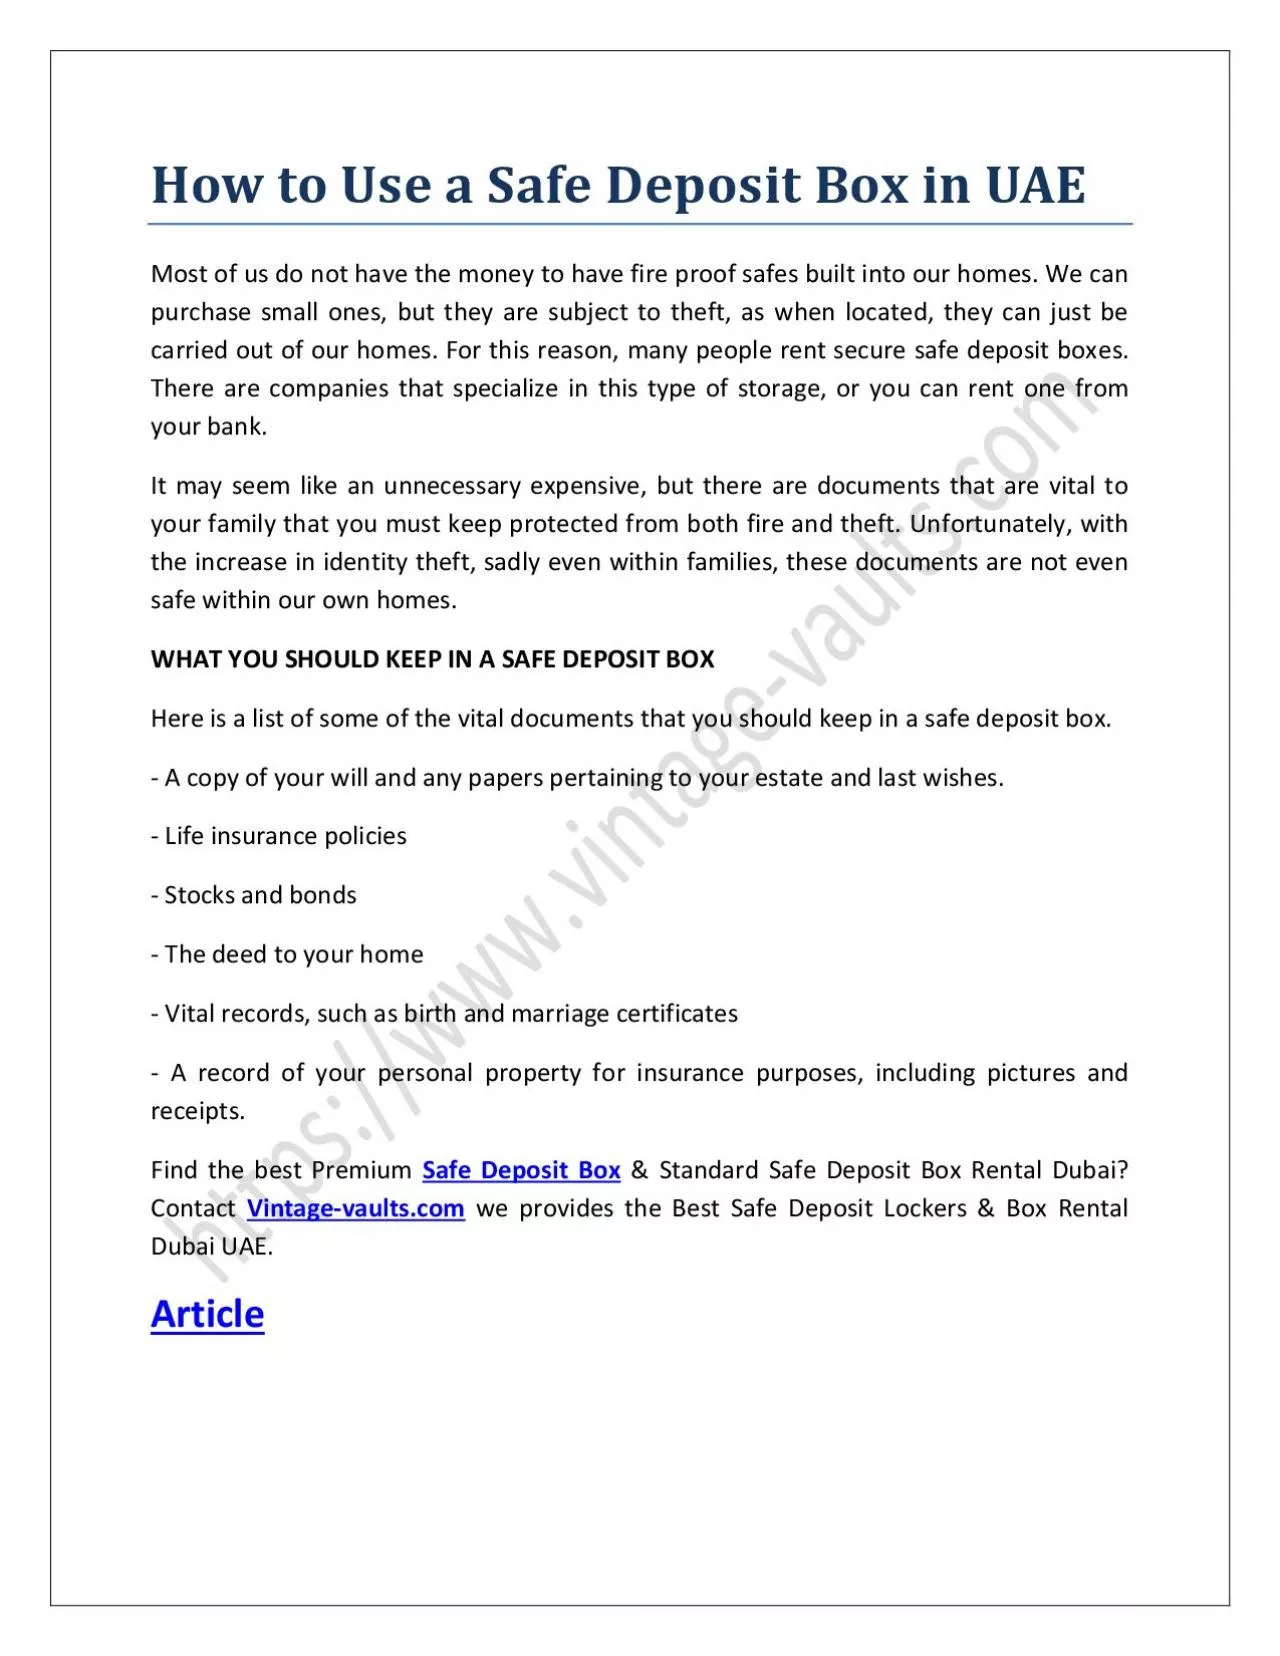 How to Use a Safe Deposit Box in UAE